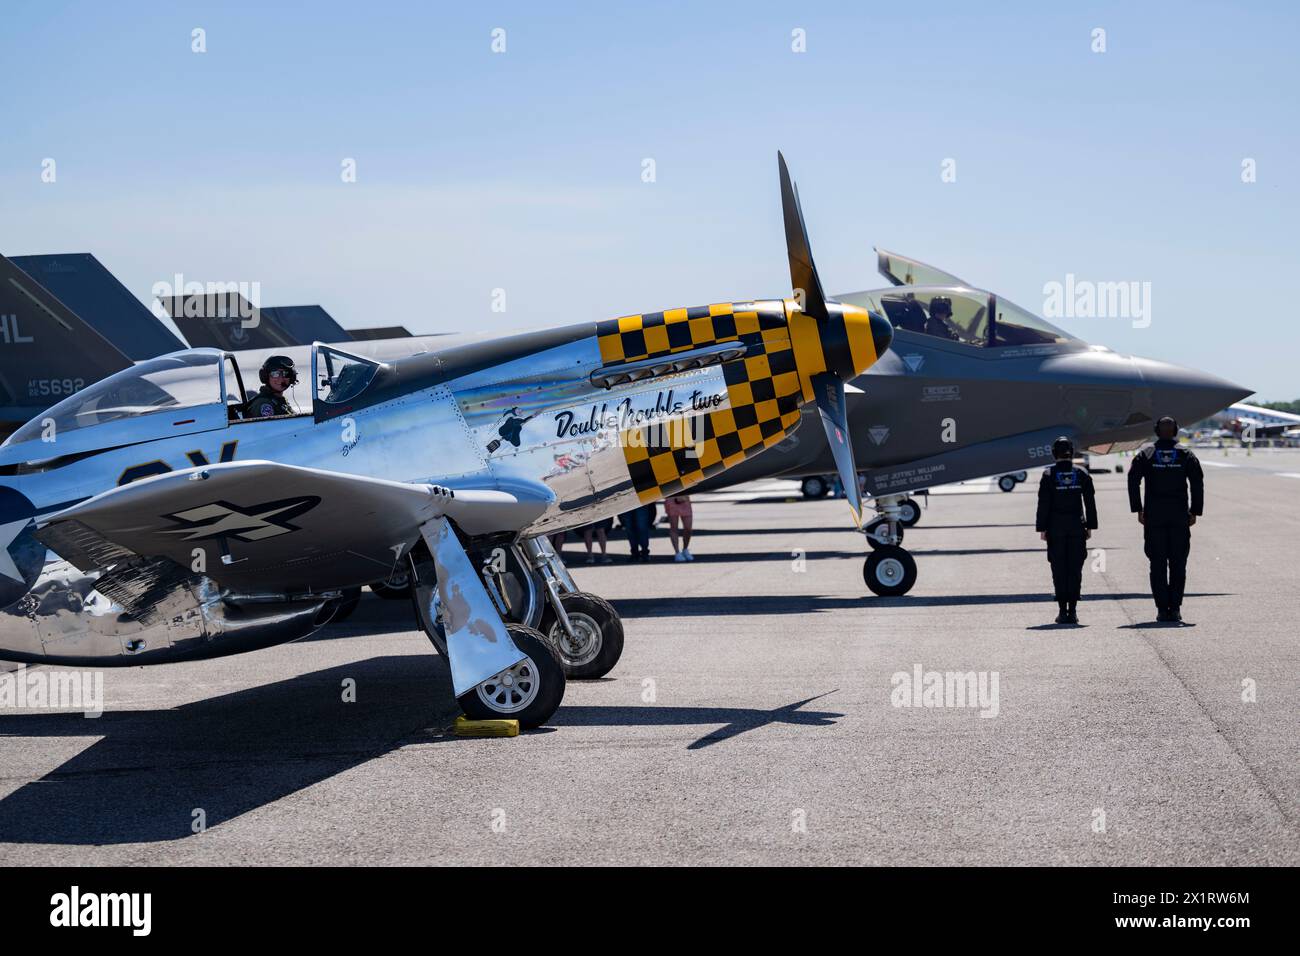 A P-51 Mustang sits in formation with Capt. Melanie “MACH” Kluesner, F-35A Lightning II Demonstration Team pilot and commander, during the SUN ‘n FUN Stock Photo